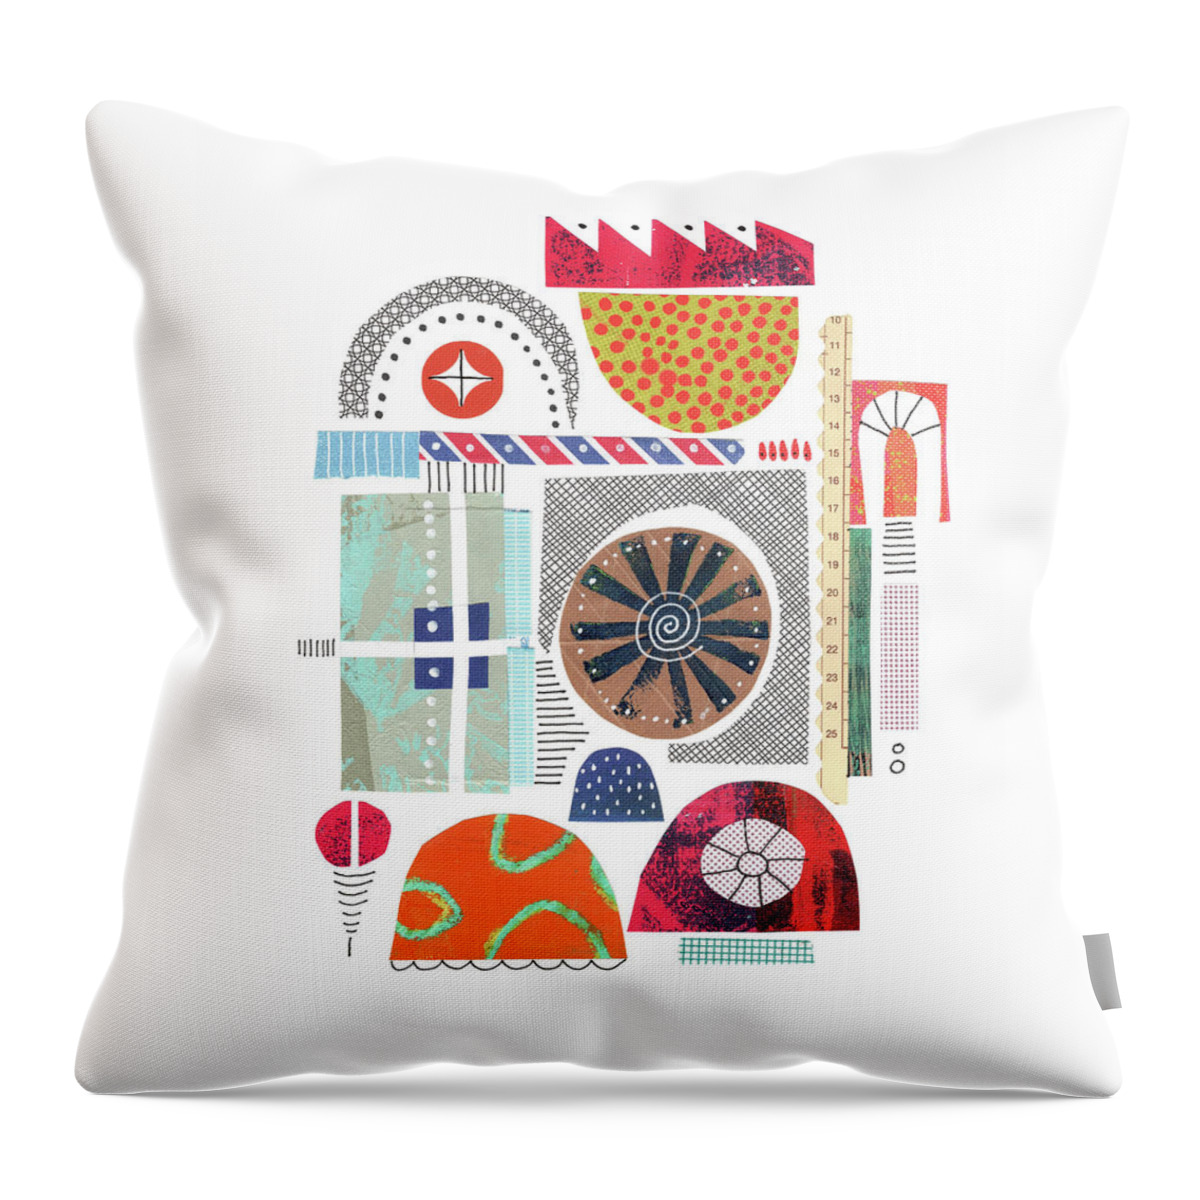 Collage Throw Pillow featuring the mixed media Spirale by Lucie Duclos